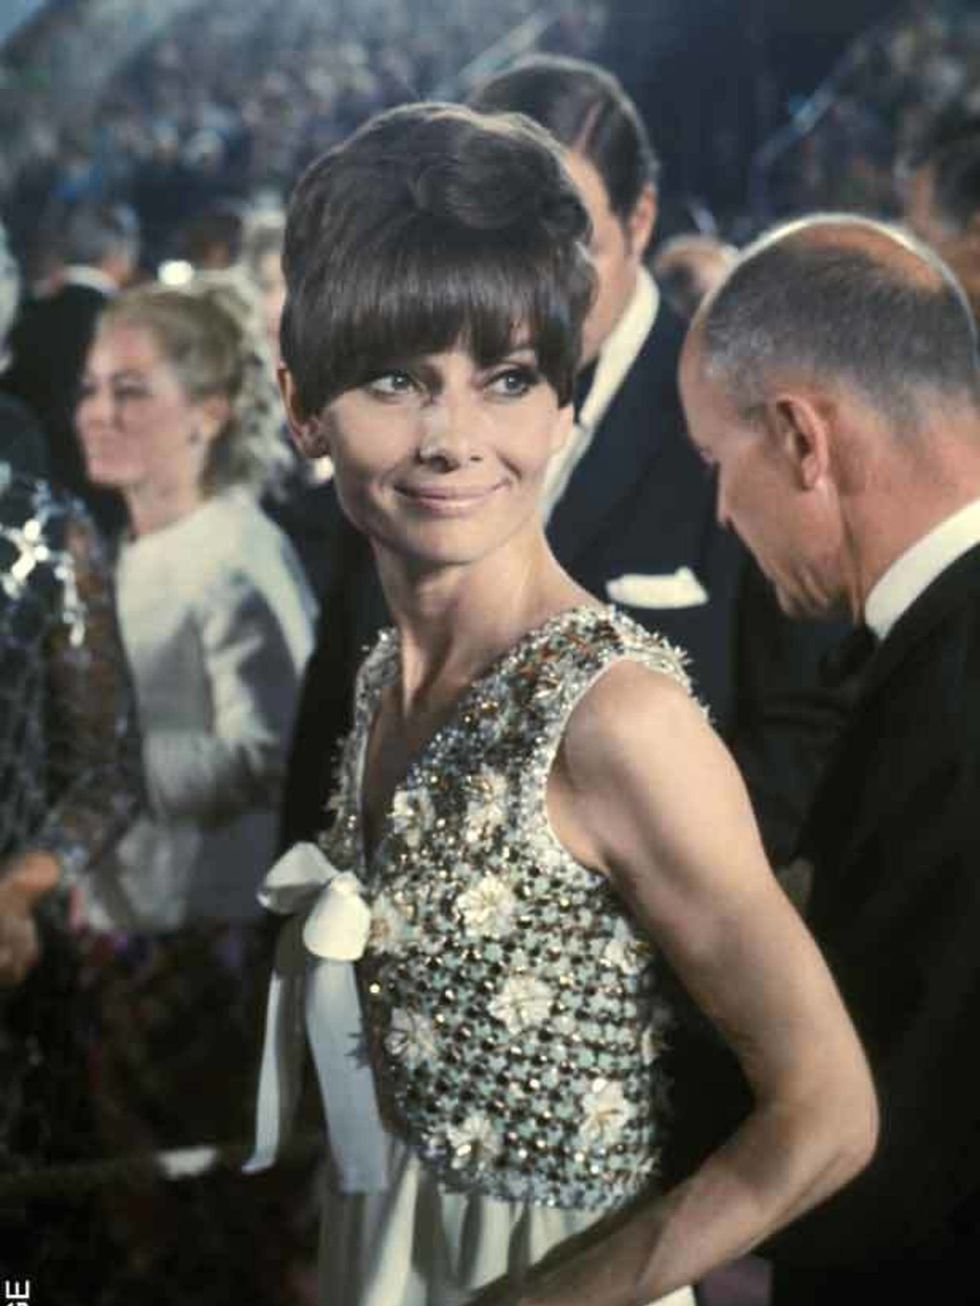 <p><a href="http://www.elleuk.com/fashion/special-features/bridal-icons">Audrey Hepburn</a> at the 47th Annual Academy Awards, 8 April 1975 </p>